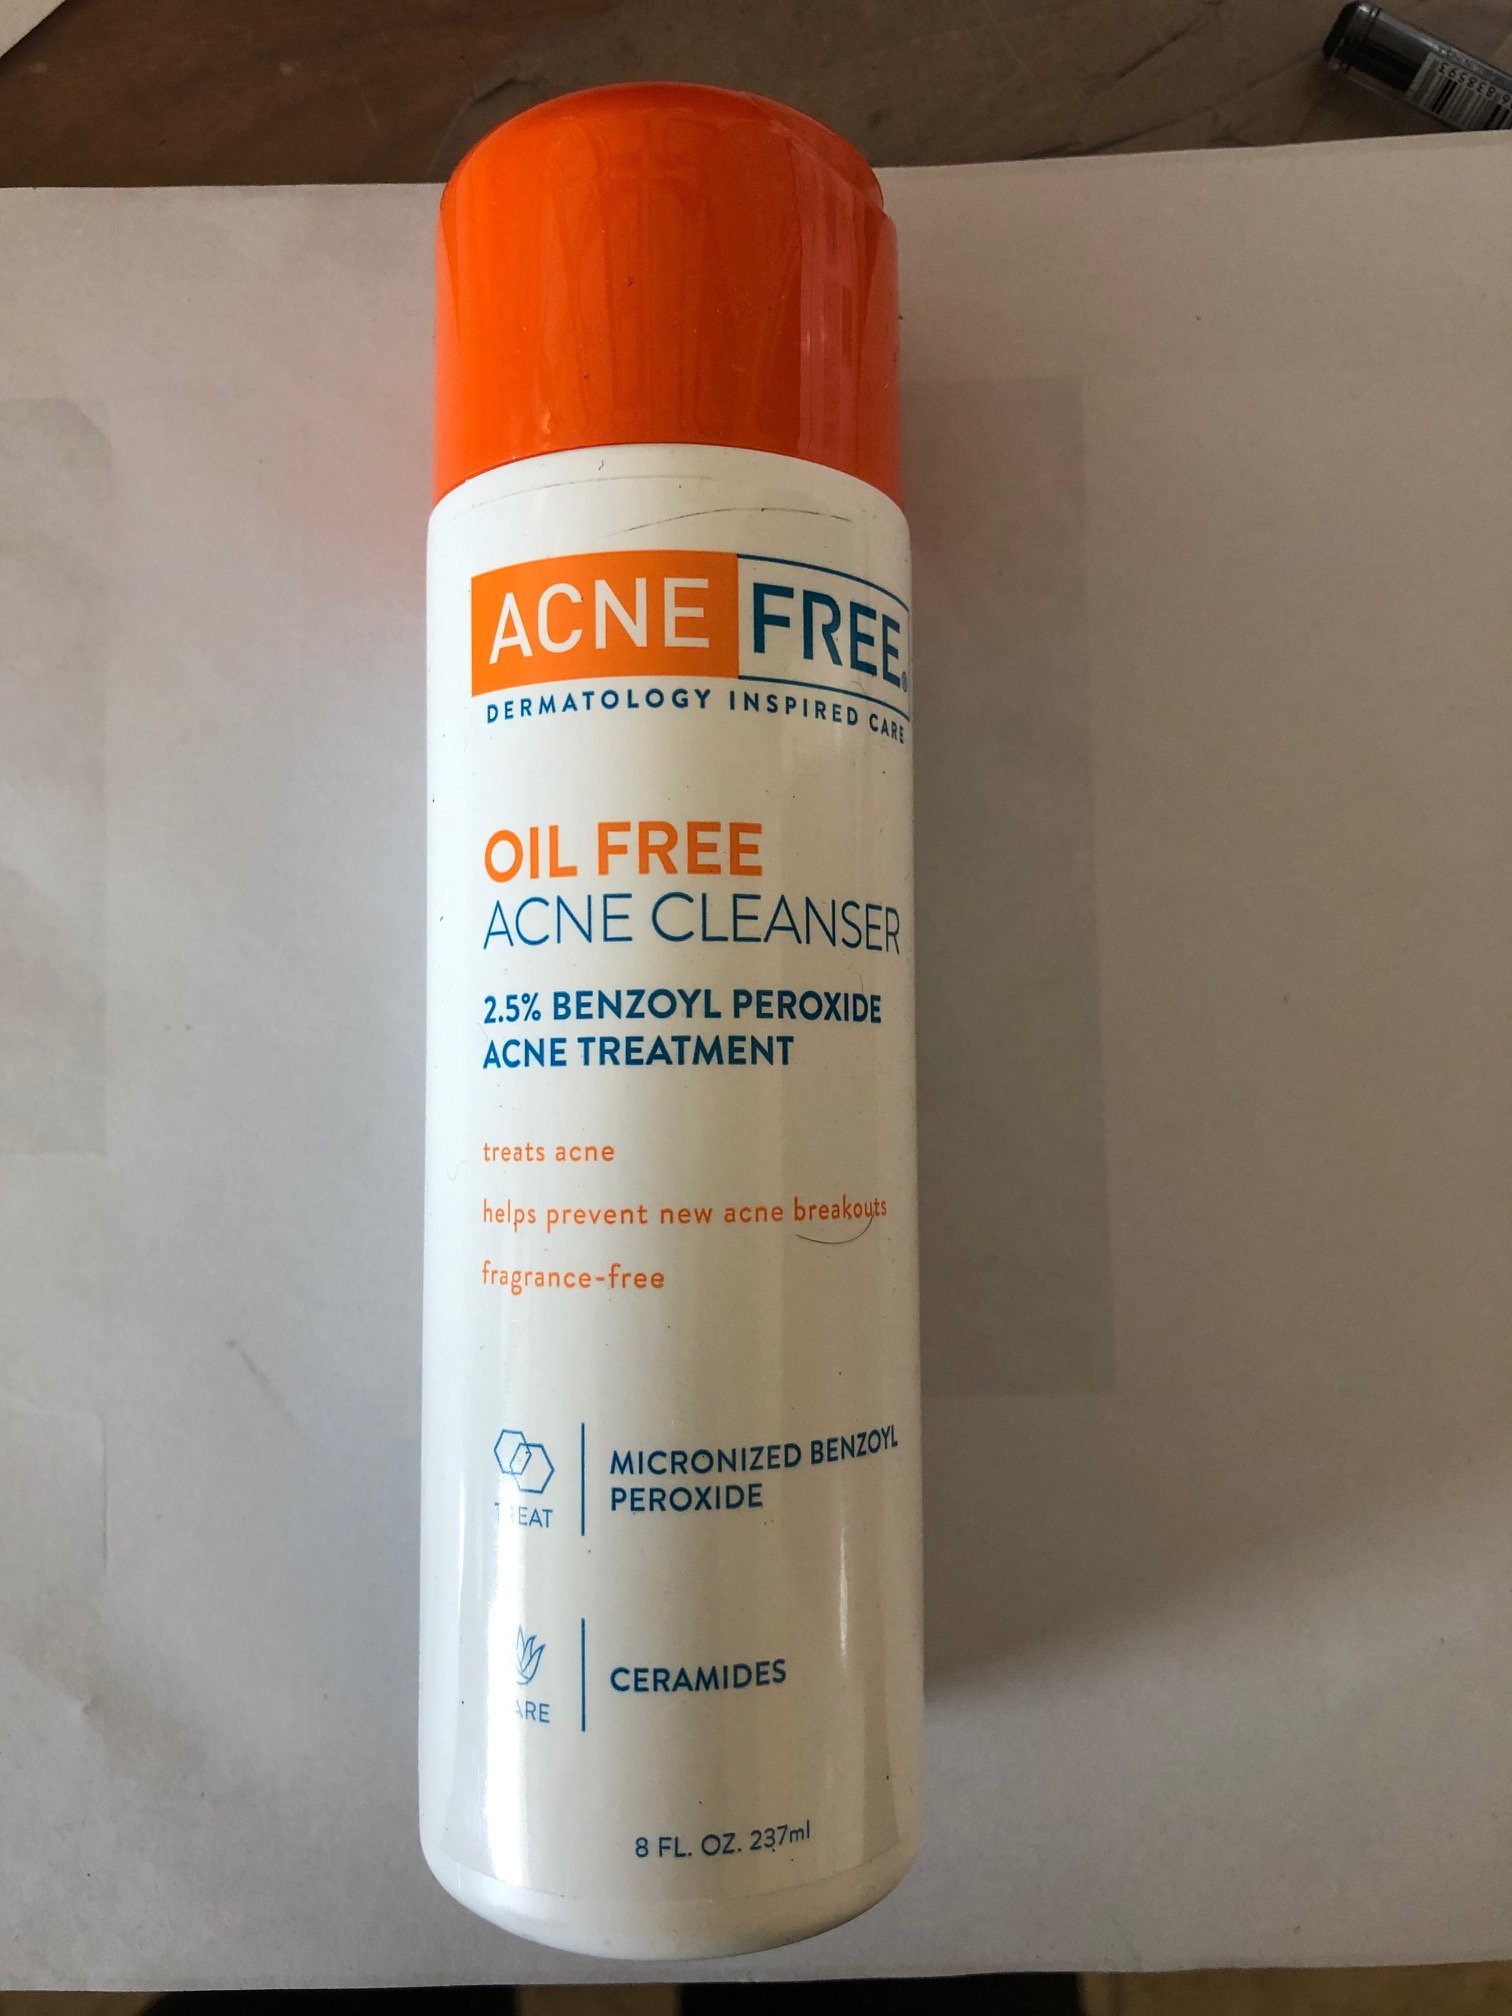 Acnefree Oil Free Acne Cleanser Liq 8Oz By Loreal